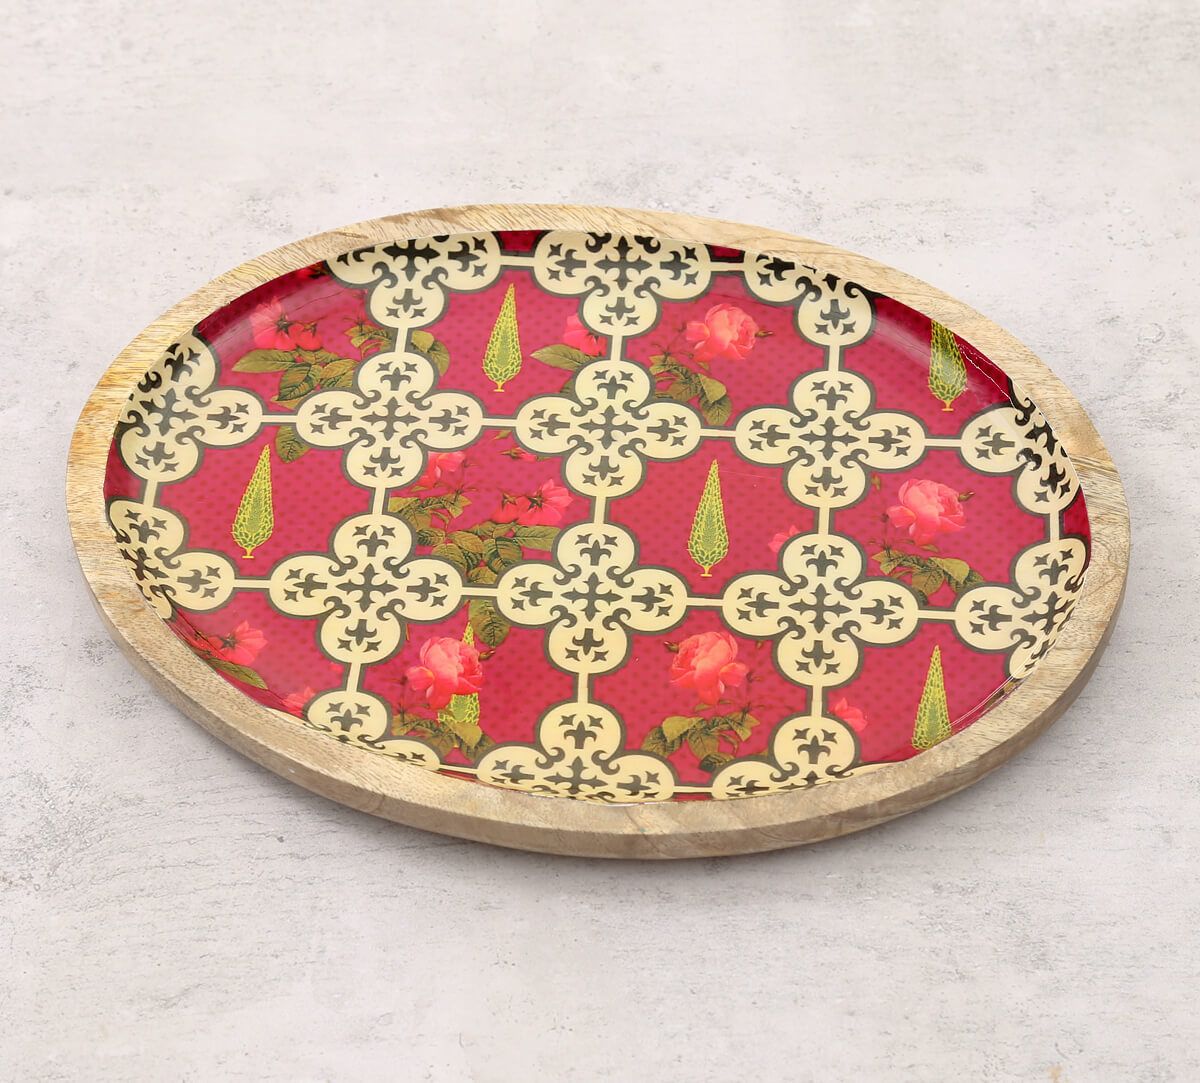 India Circus by Krsnaa Mehta Clover's Knotty Play Oval Platter